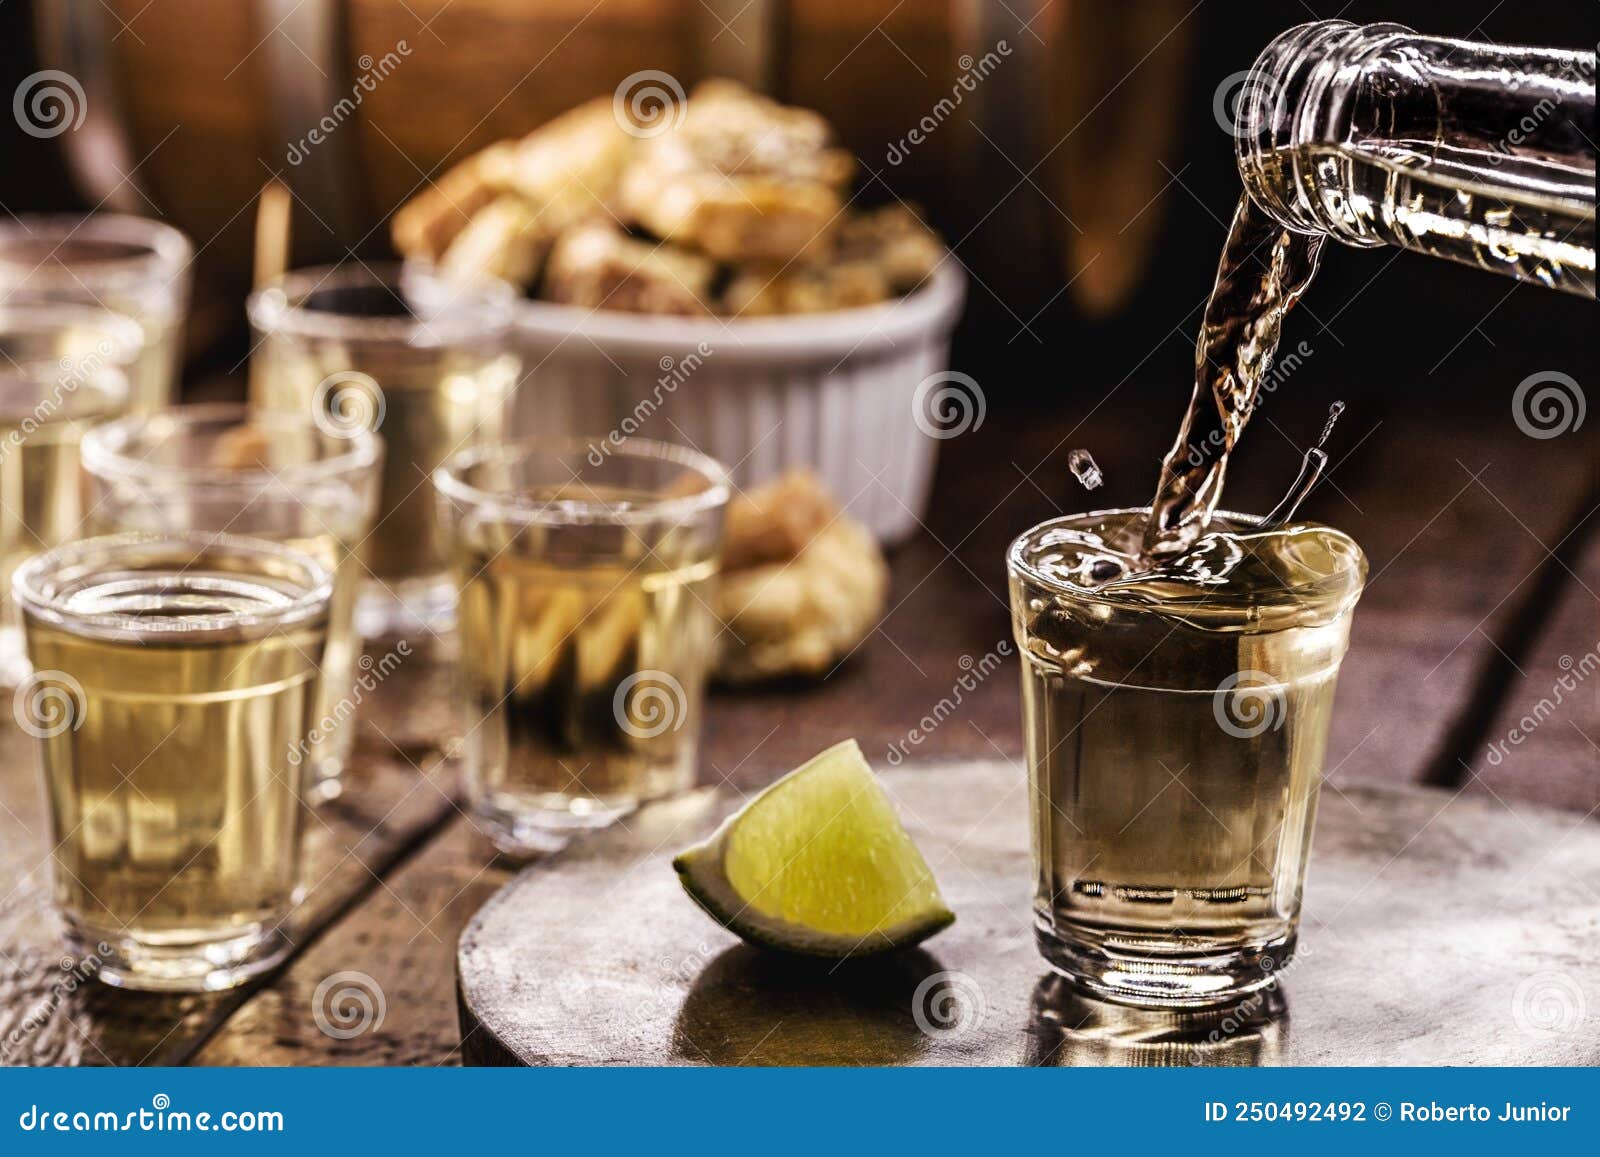 https://thumbs.dreamstime.com/z/glass-cacha%C3%A7a-pinga-cana-caninha-sugar-cane-brandy-typical-drink-brazil-drops-flying-spilling-overflowing-250492492.jpg